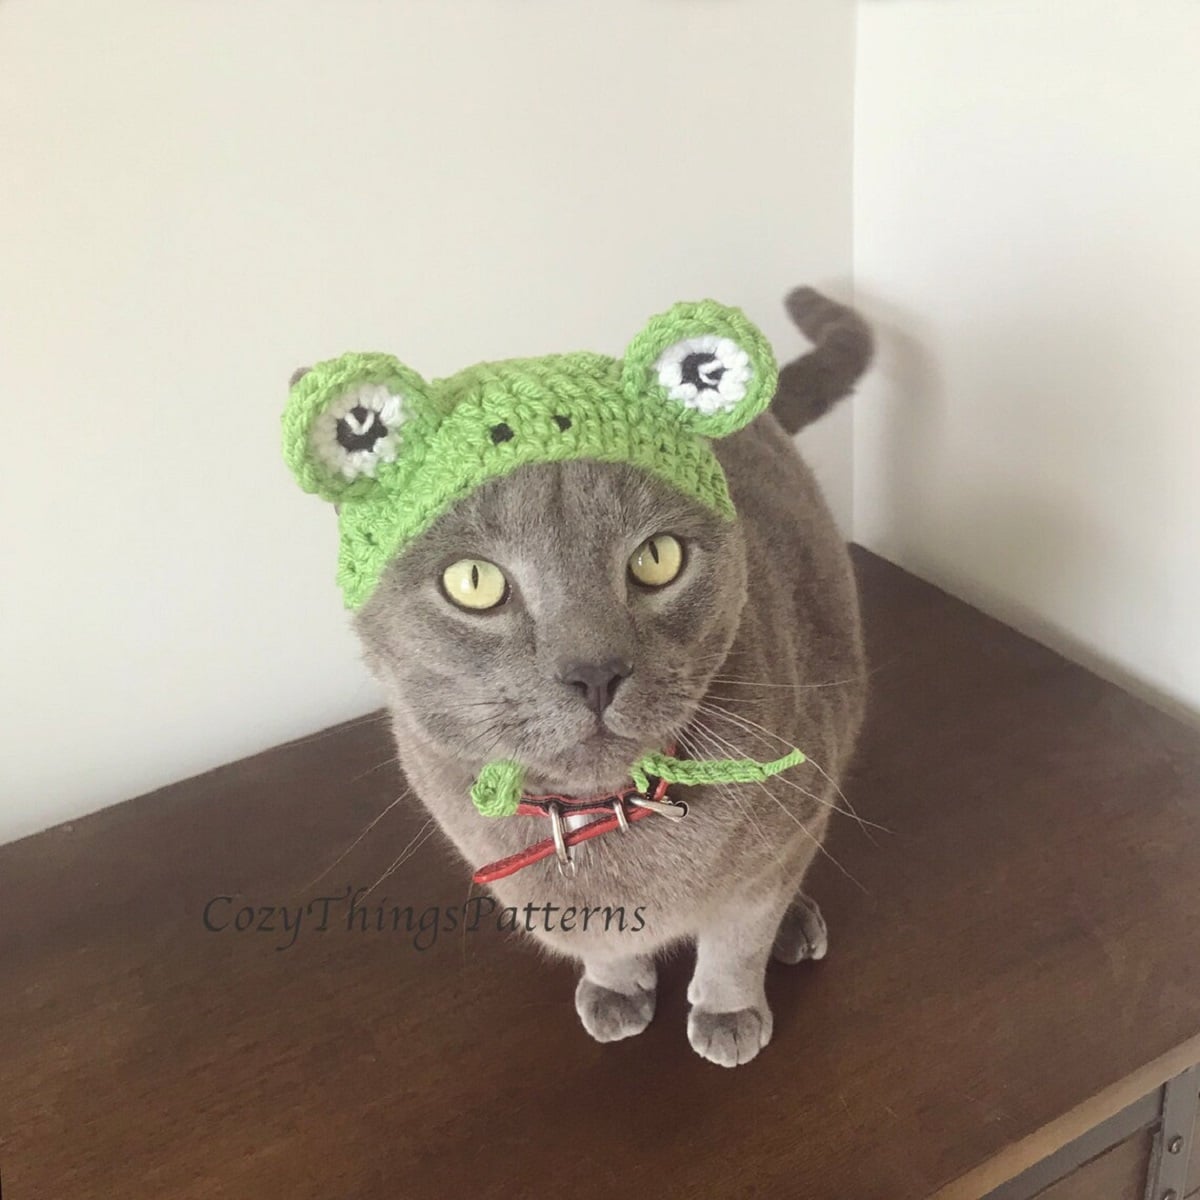 A gray cat sitting on a table wearing a green crochet hat with frog eyes over its ears and green string around its neck to secure it.